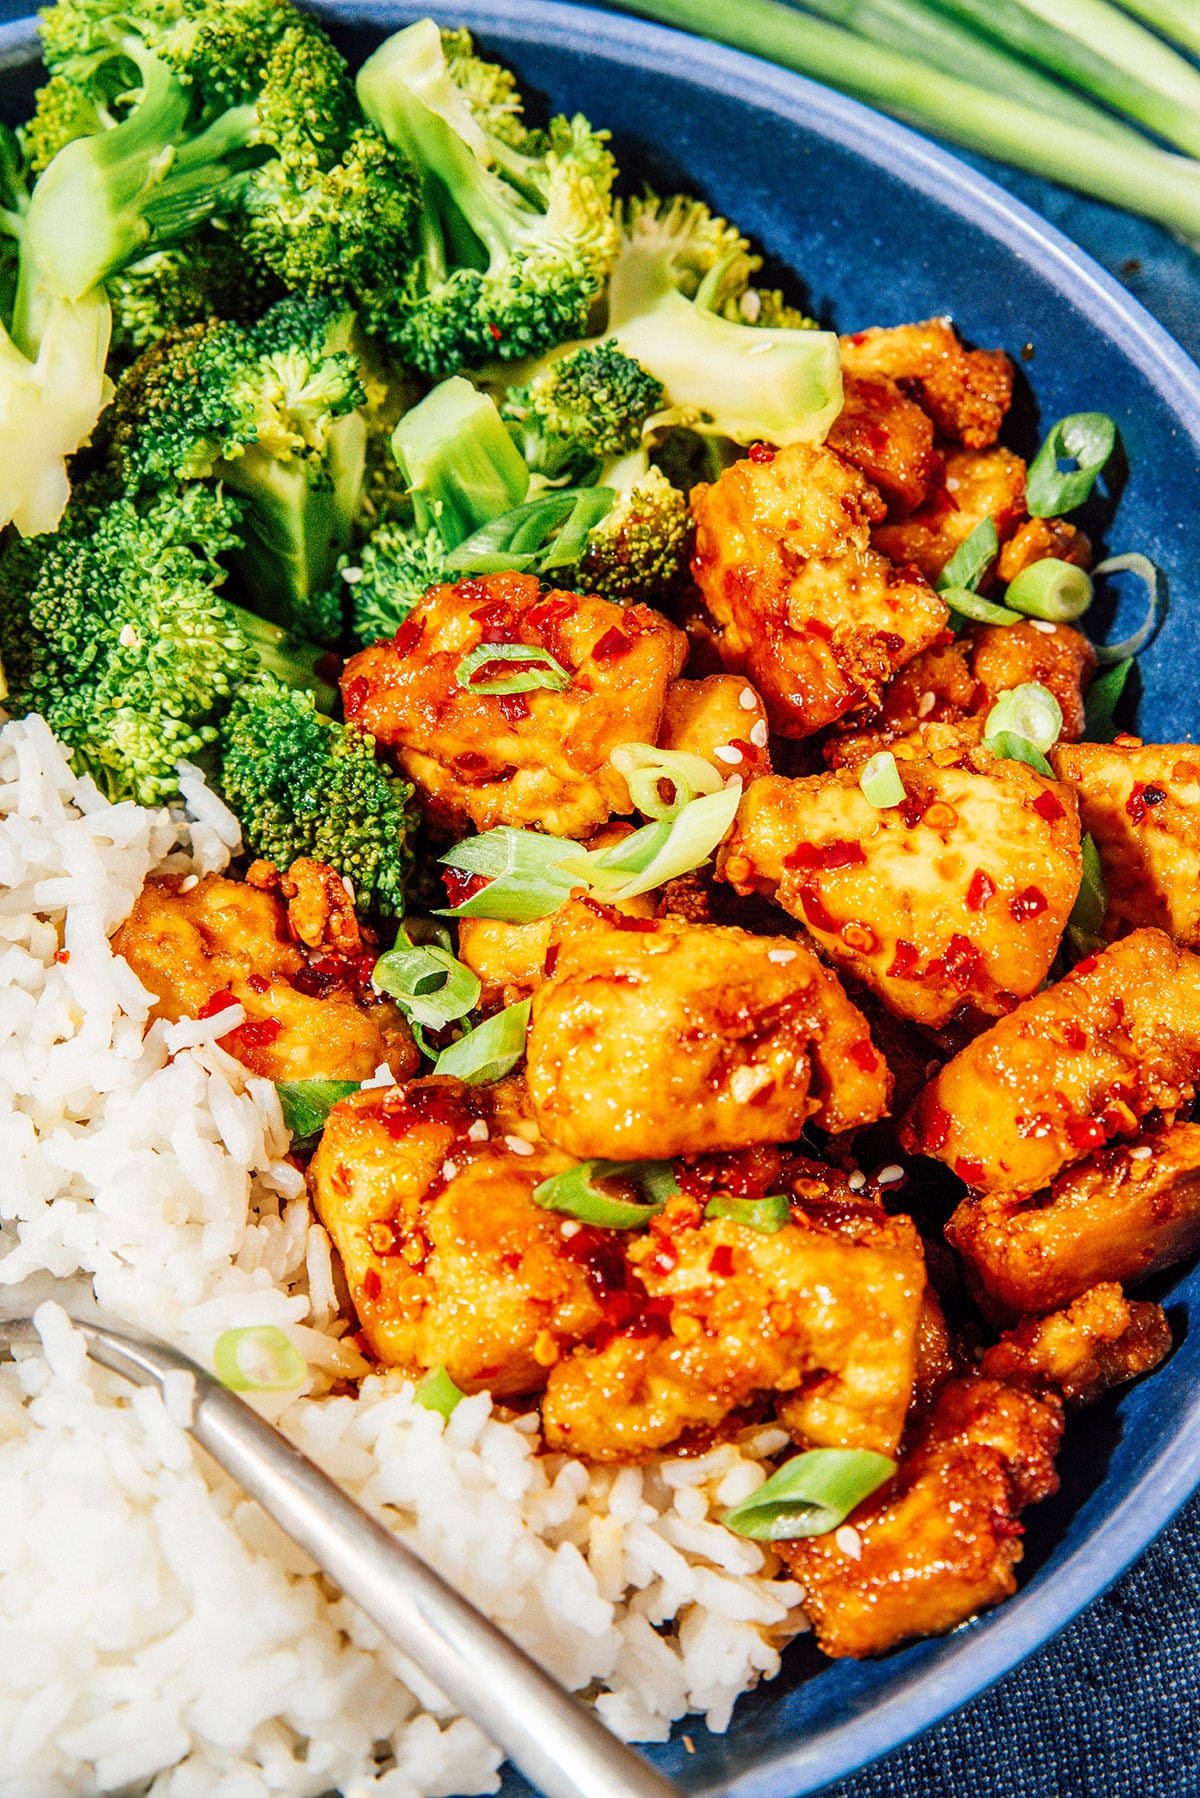 Teryaki tofu with rice and broccoli in a blue bowl.